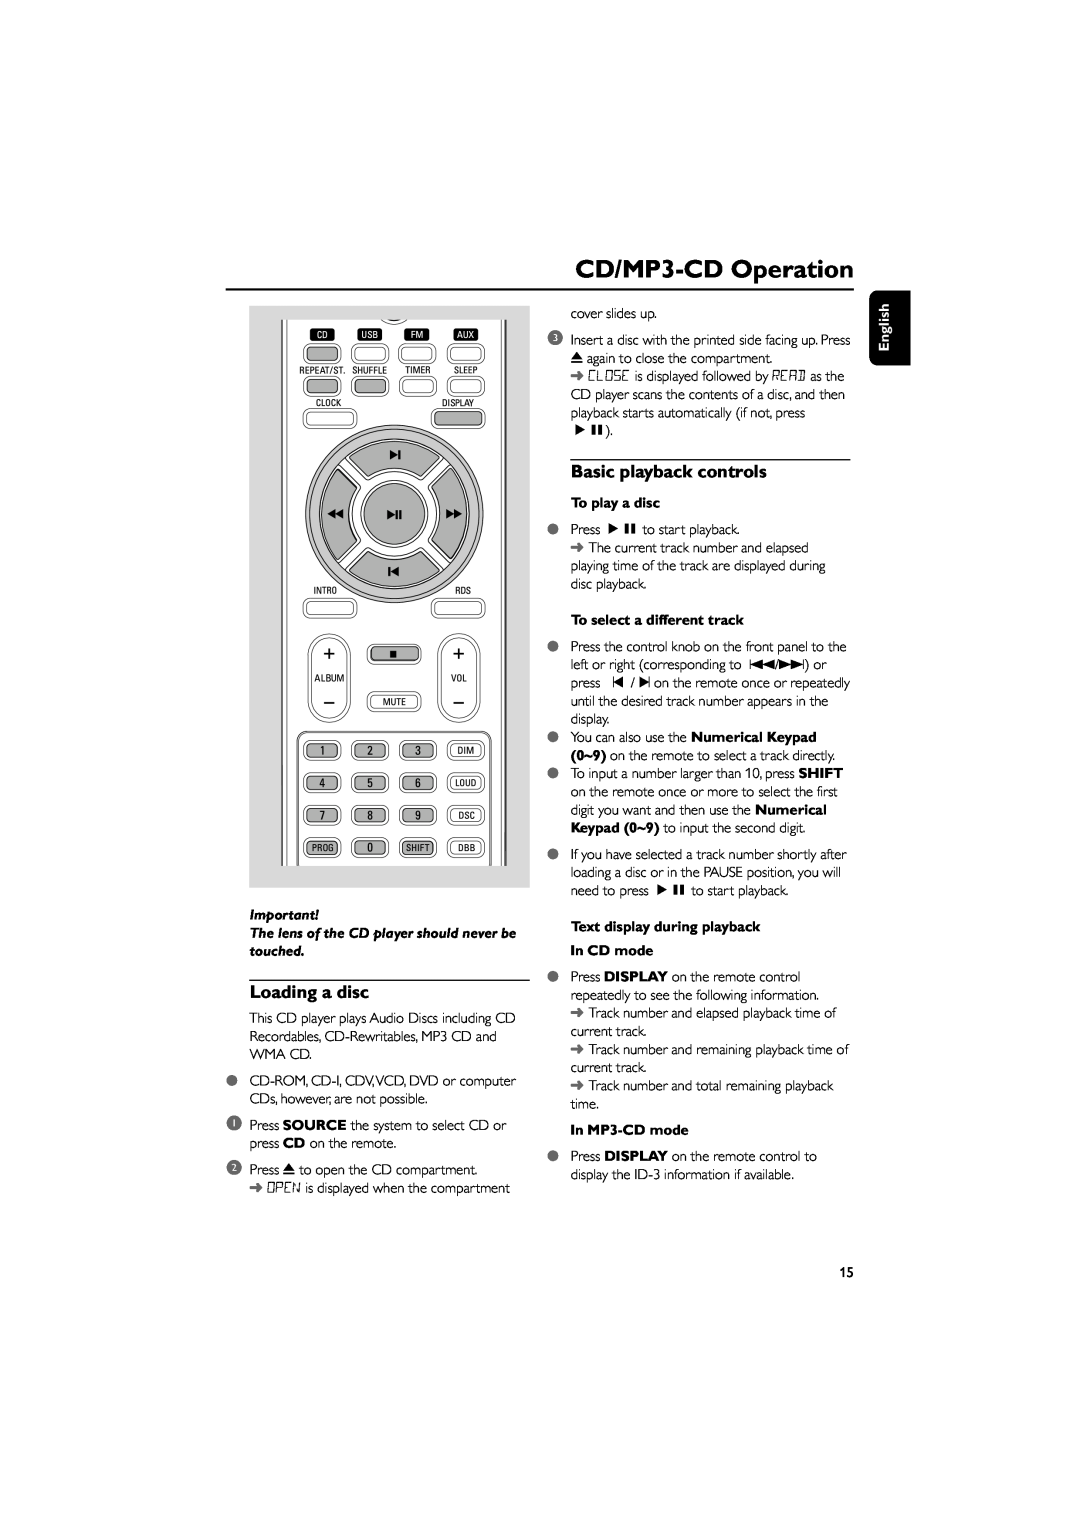 Philips MCM710 CD/MP3-CDOperation, Loading a disc, Basic playback controls, To play a disc, To select a different track 